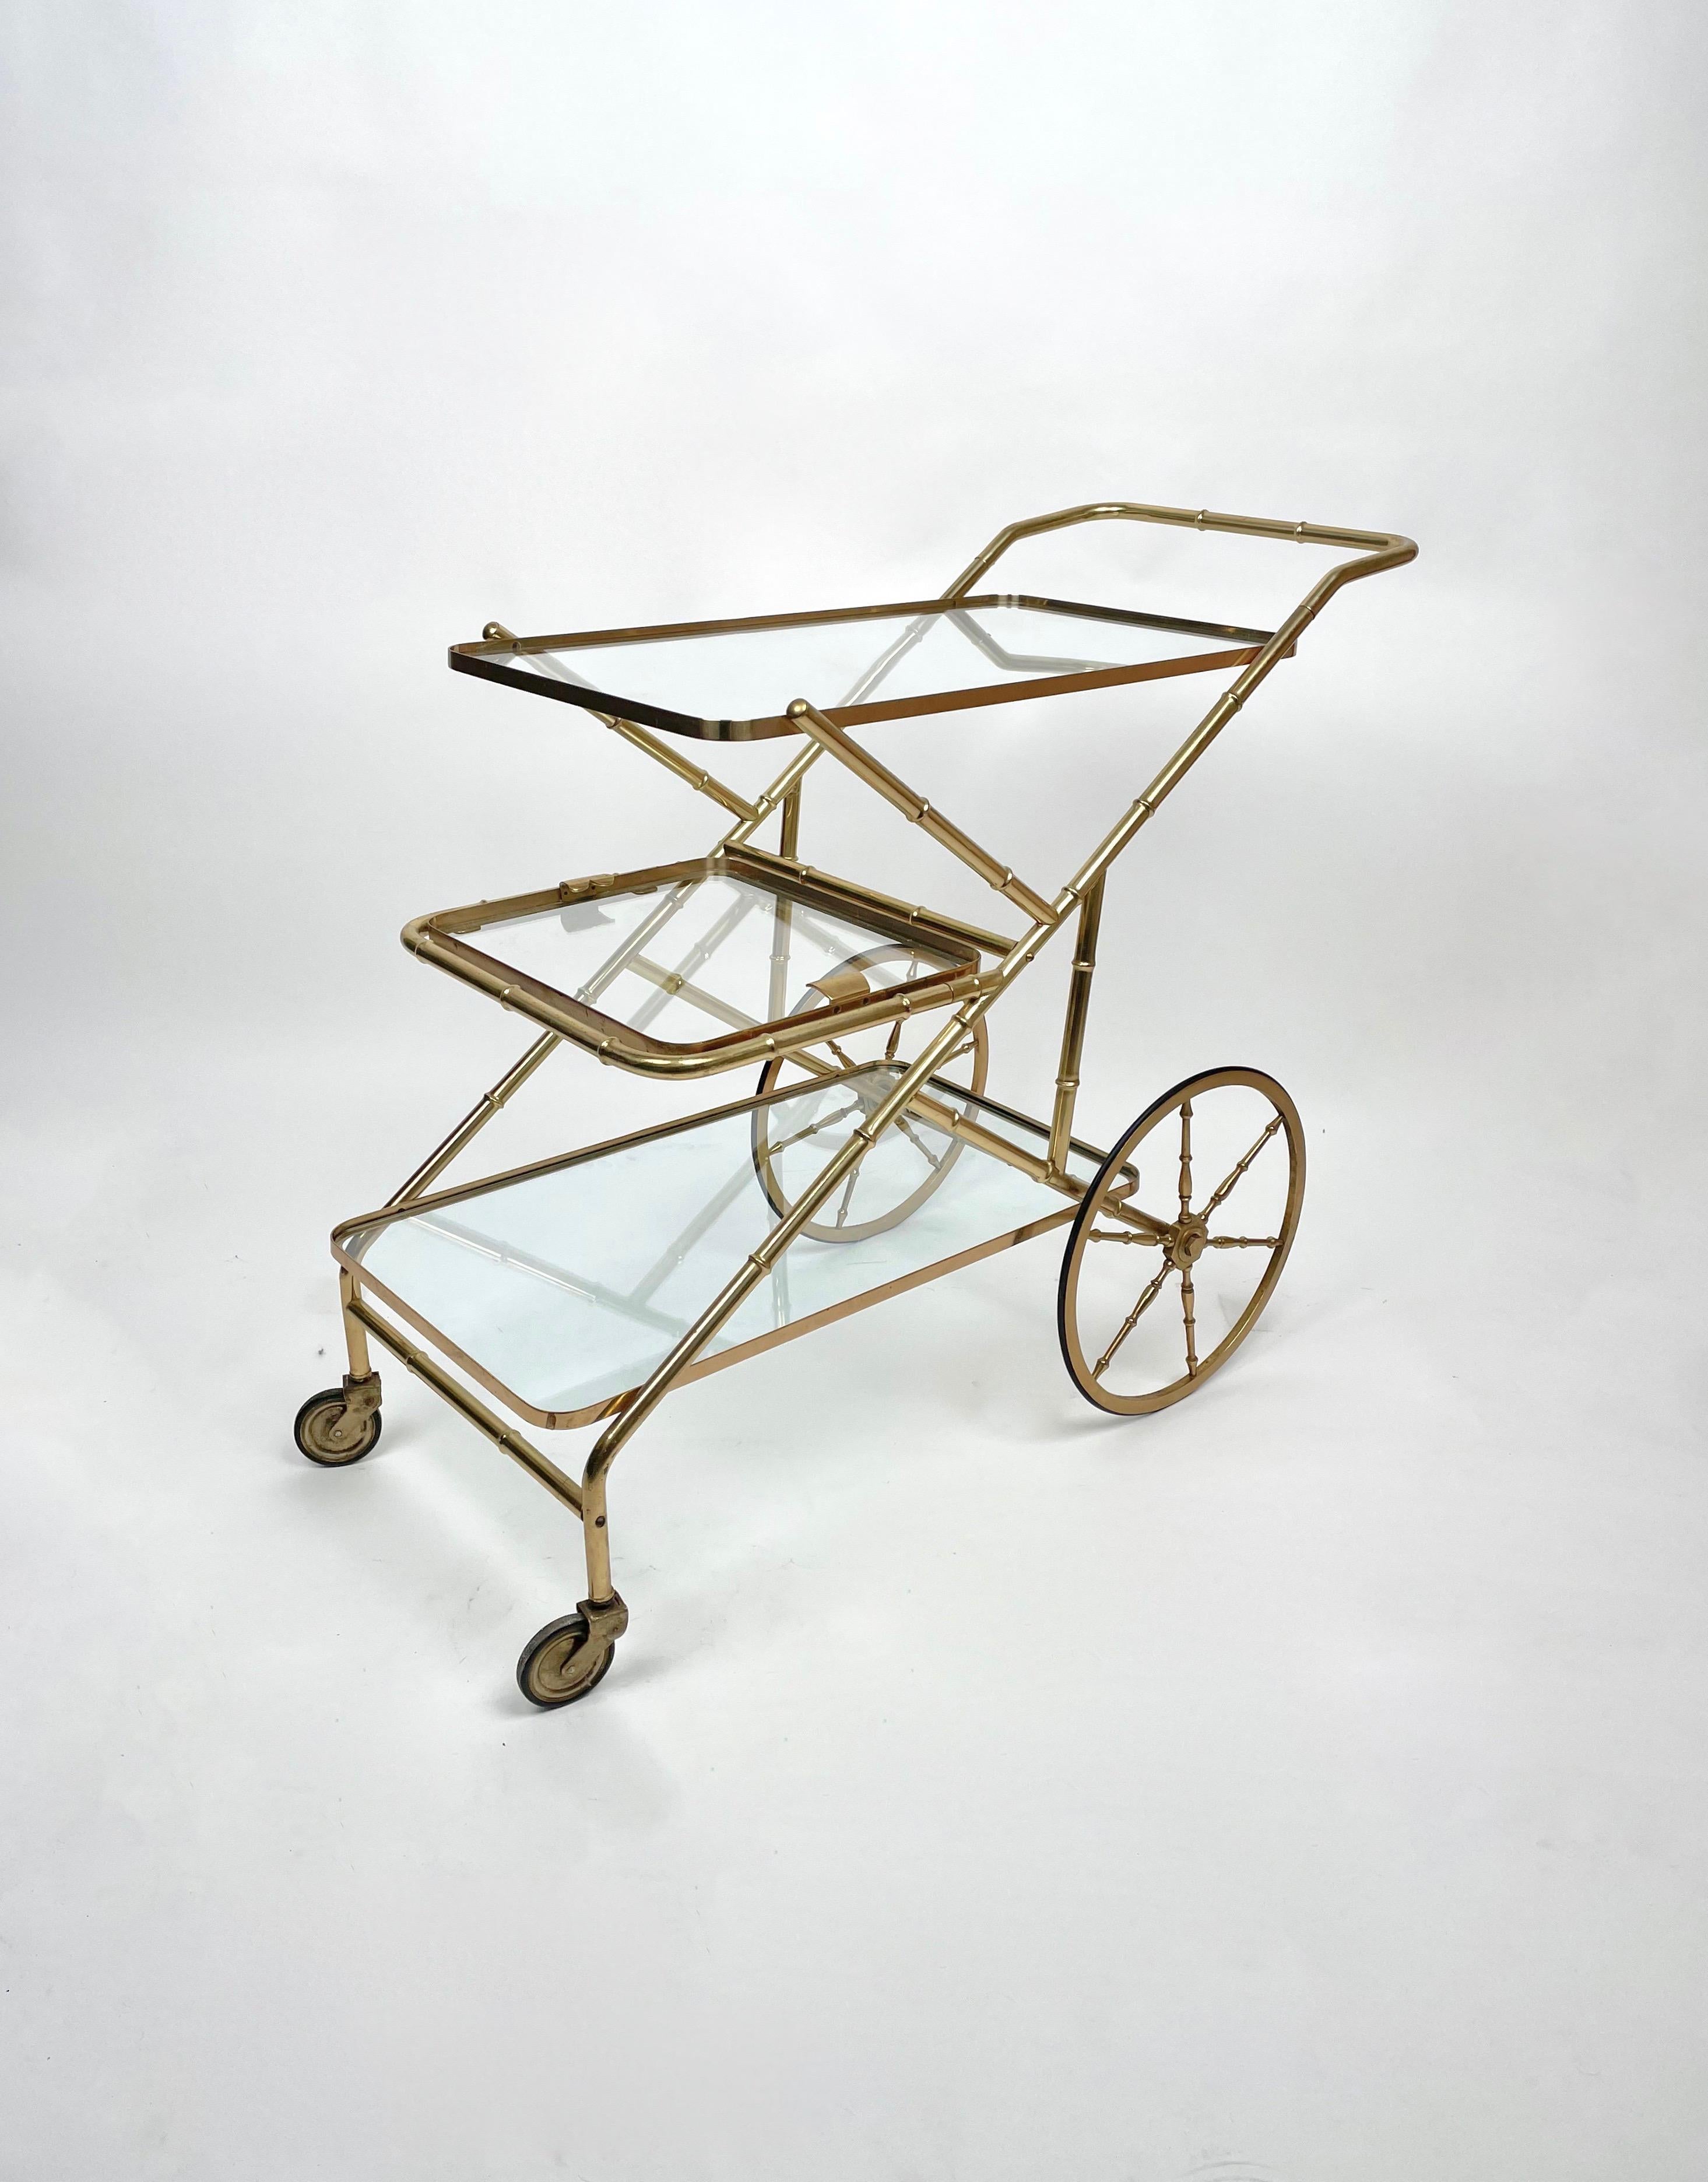 Serving bar cart in a brass, faux bamboo structure with three glass shelves, the middle one being removable, on wheels.

Made in Italy in the 1960s.